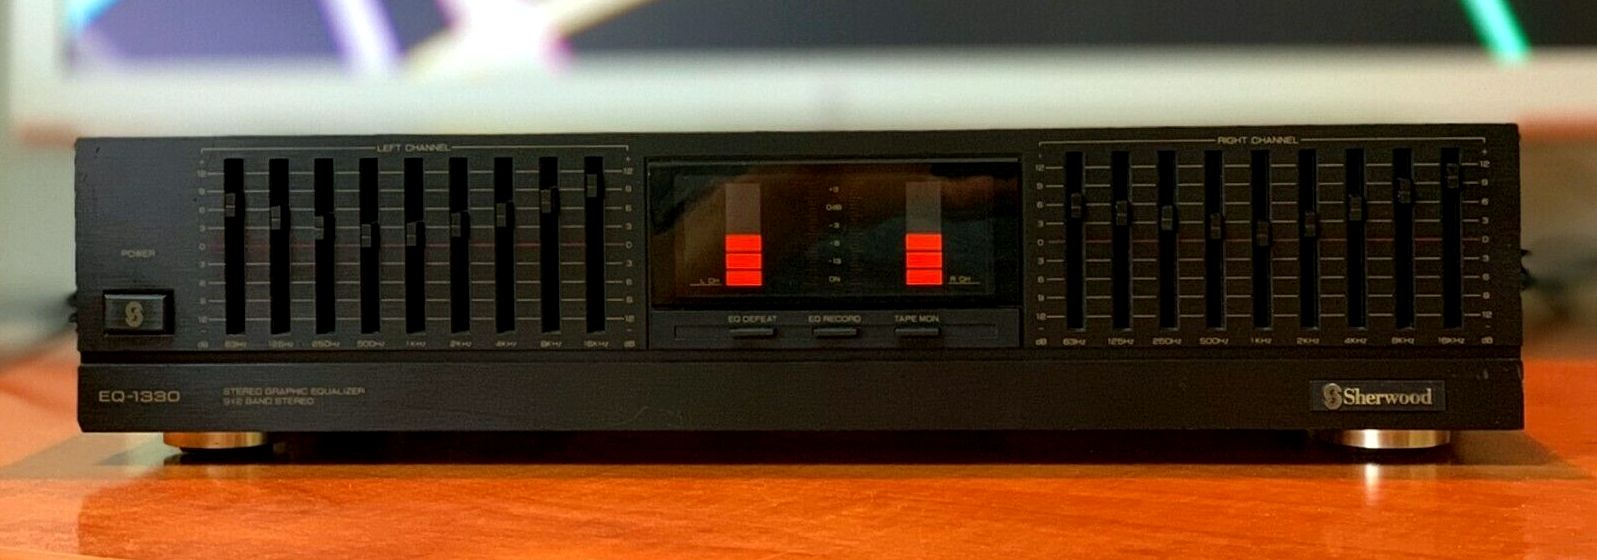 A stock image of a Sherwood EQ-1330, showing the same positioning of the EQ sliders and VU meters as in the screenshot from The Matrix. It's a black unit, with orange VU meters, the VU meters are segmented into rectangles, and the topmost segment on both left and right VU meters is red instead of orange. There are several EQ band sliders for left and right channels, to the left and right of the VU meters. They are labelled with the various cutoff frequencies between 63Hz and 16Khz.